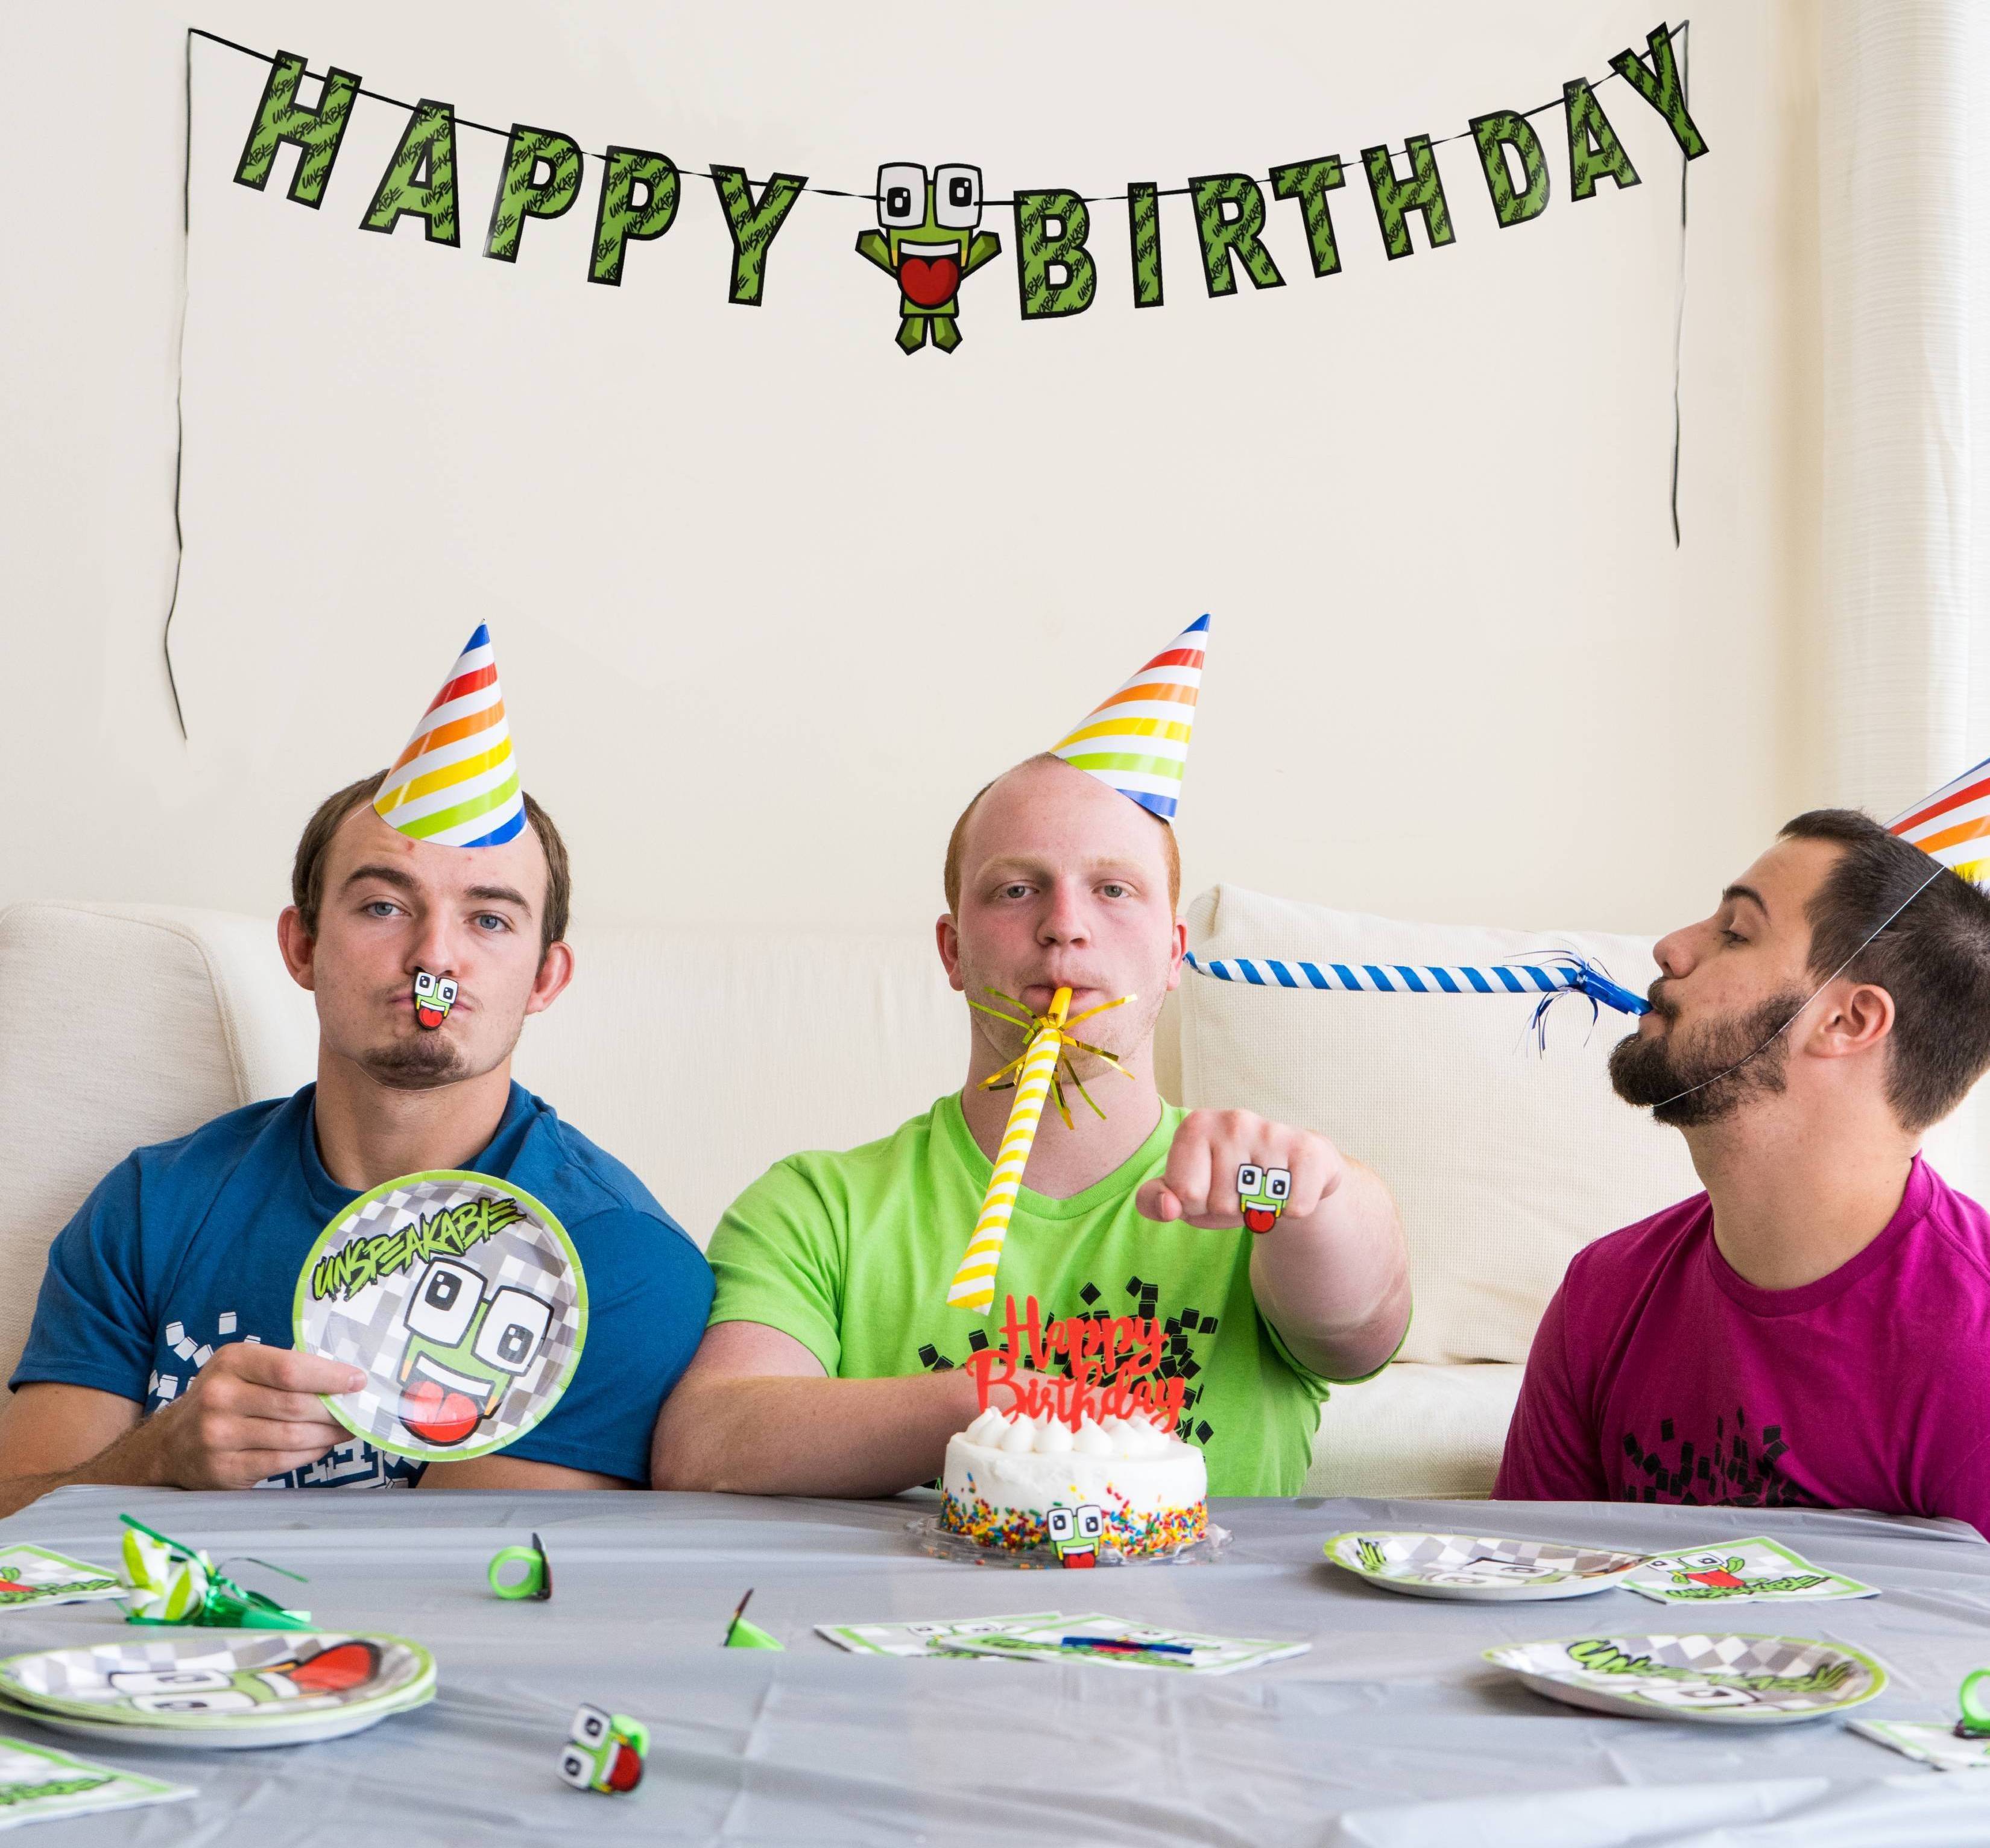 Unspeak-able Birthday Party Decorations,Includes Banner,Cake  Topper,Balloons ,for Unspeak-able Theme…See more Unspeak-able Birthday  Party